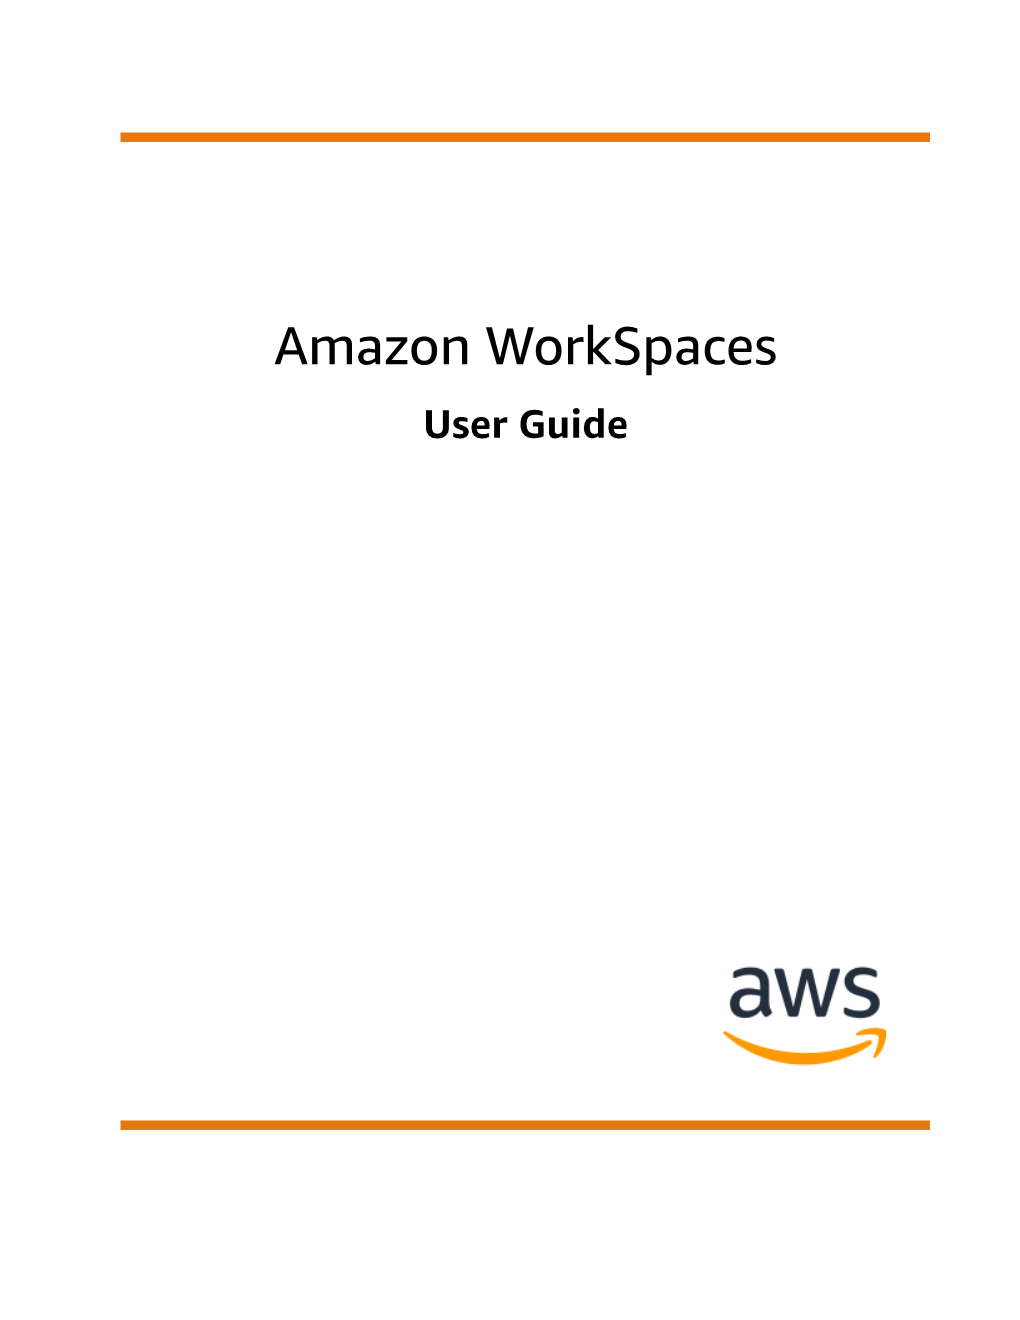 Amazon Workspaces User Guide Amazon Workspaces User Guide